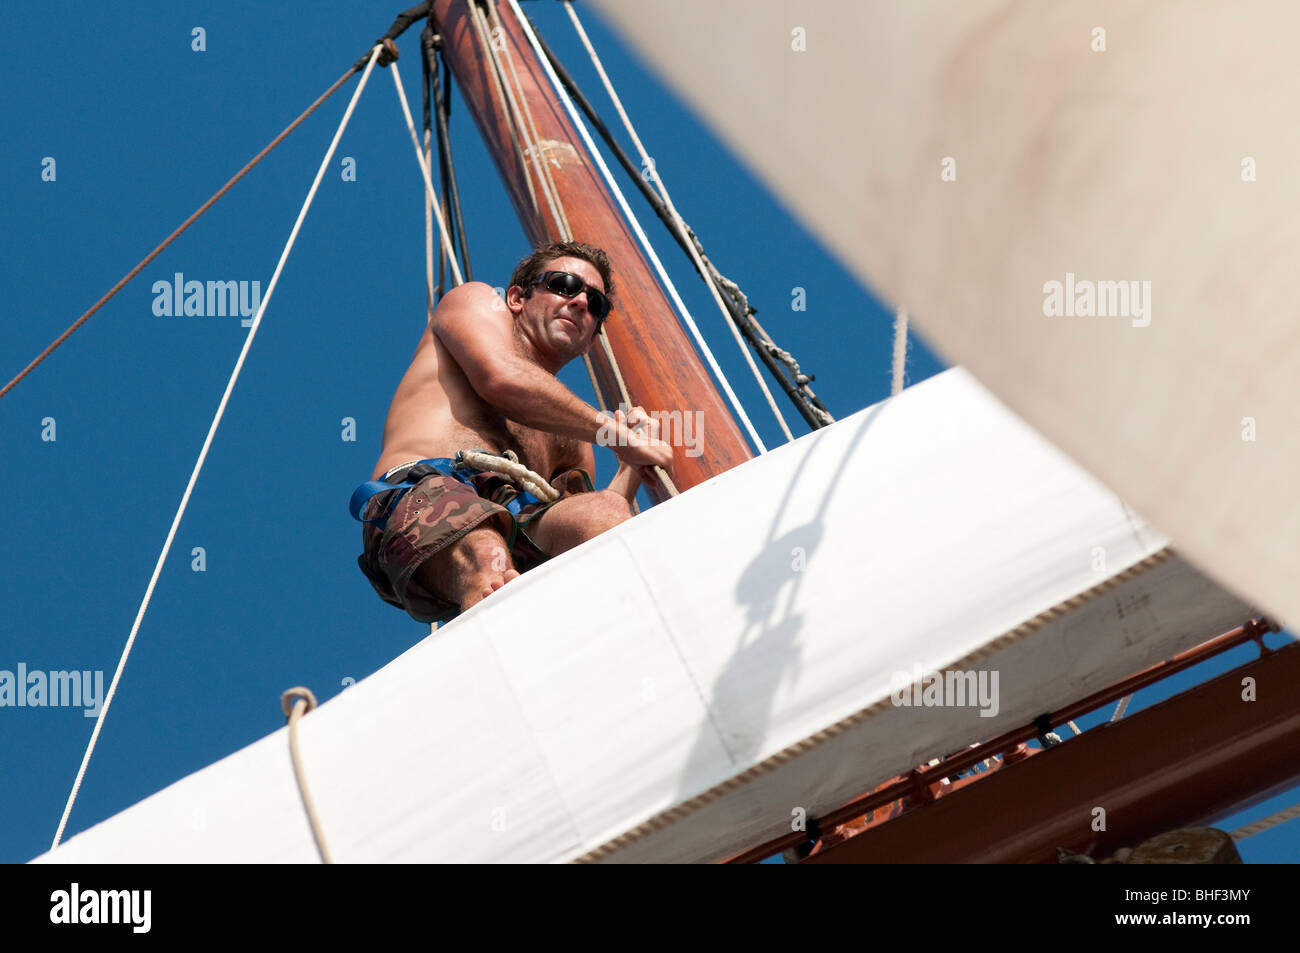 Crew members of the square-rigged tall ship Solway Lass working aloft under sail Stock Photo